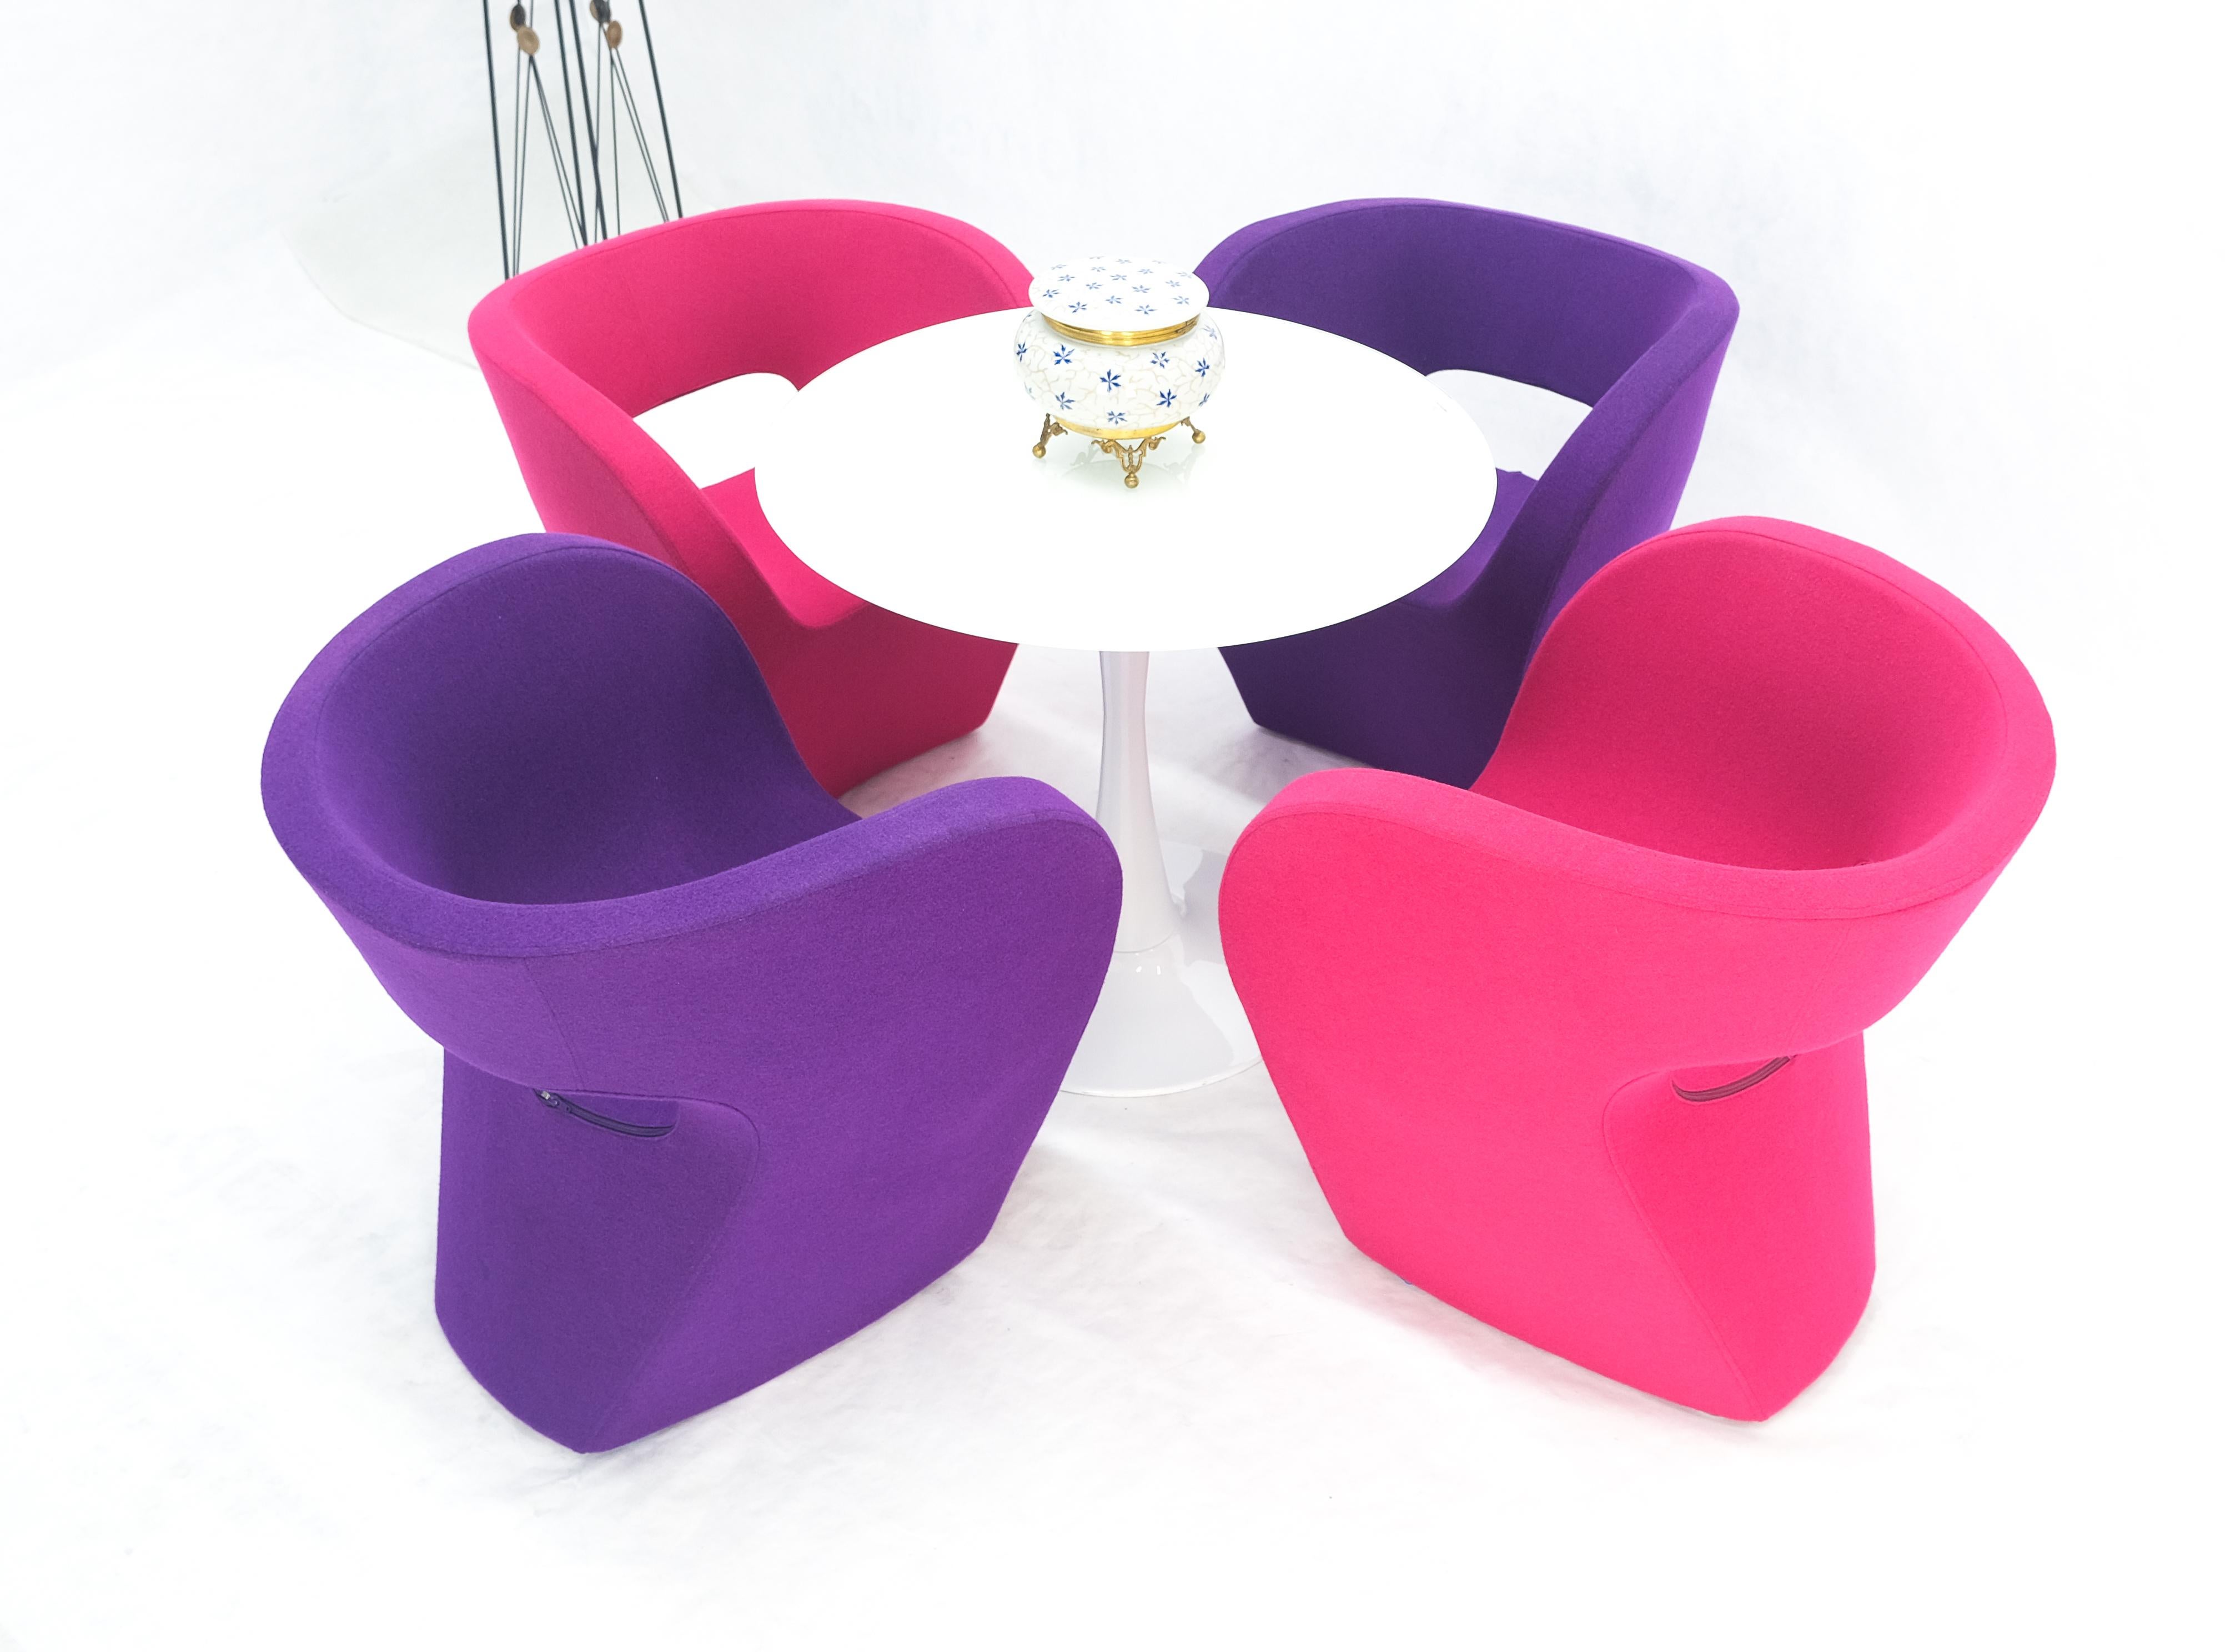 Set 4 Albert Armchair by Ron Arad for Moroso Purple & Red Wool Upholstery MINT! For Sale 9